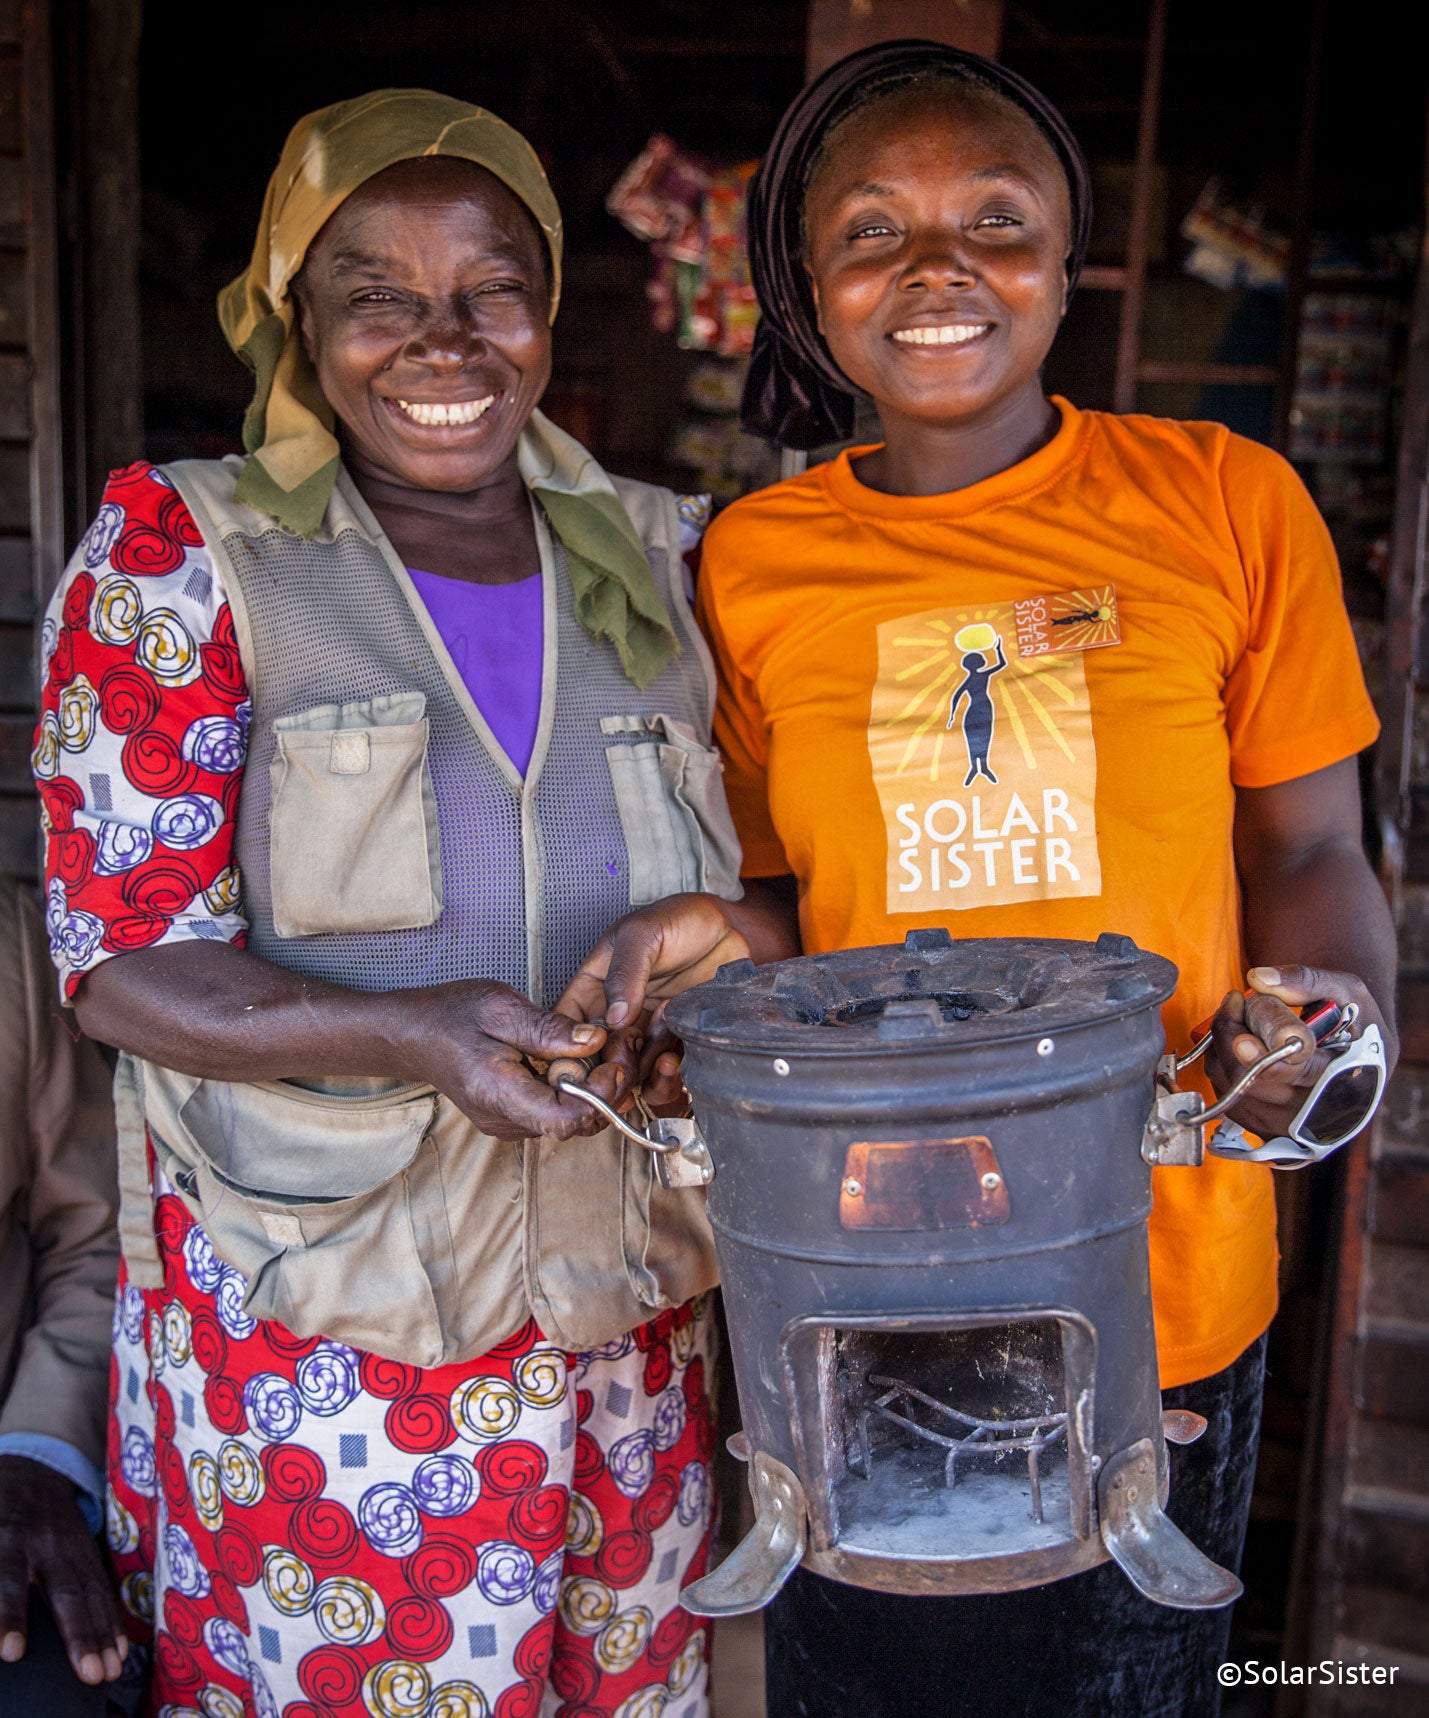 Two women stand together, smiling, holding and old coal stove. One woman wears an orange 'Solar Sister' tshirt